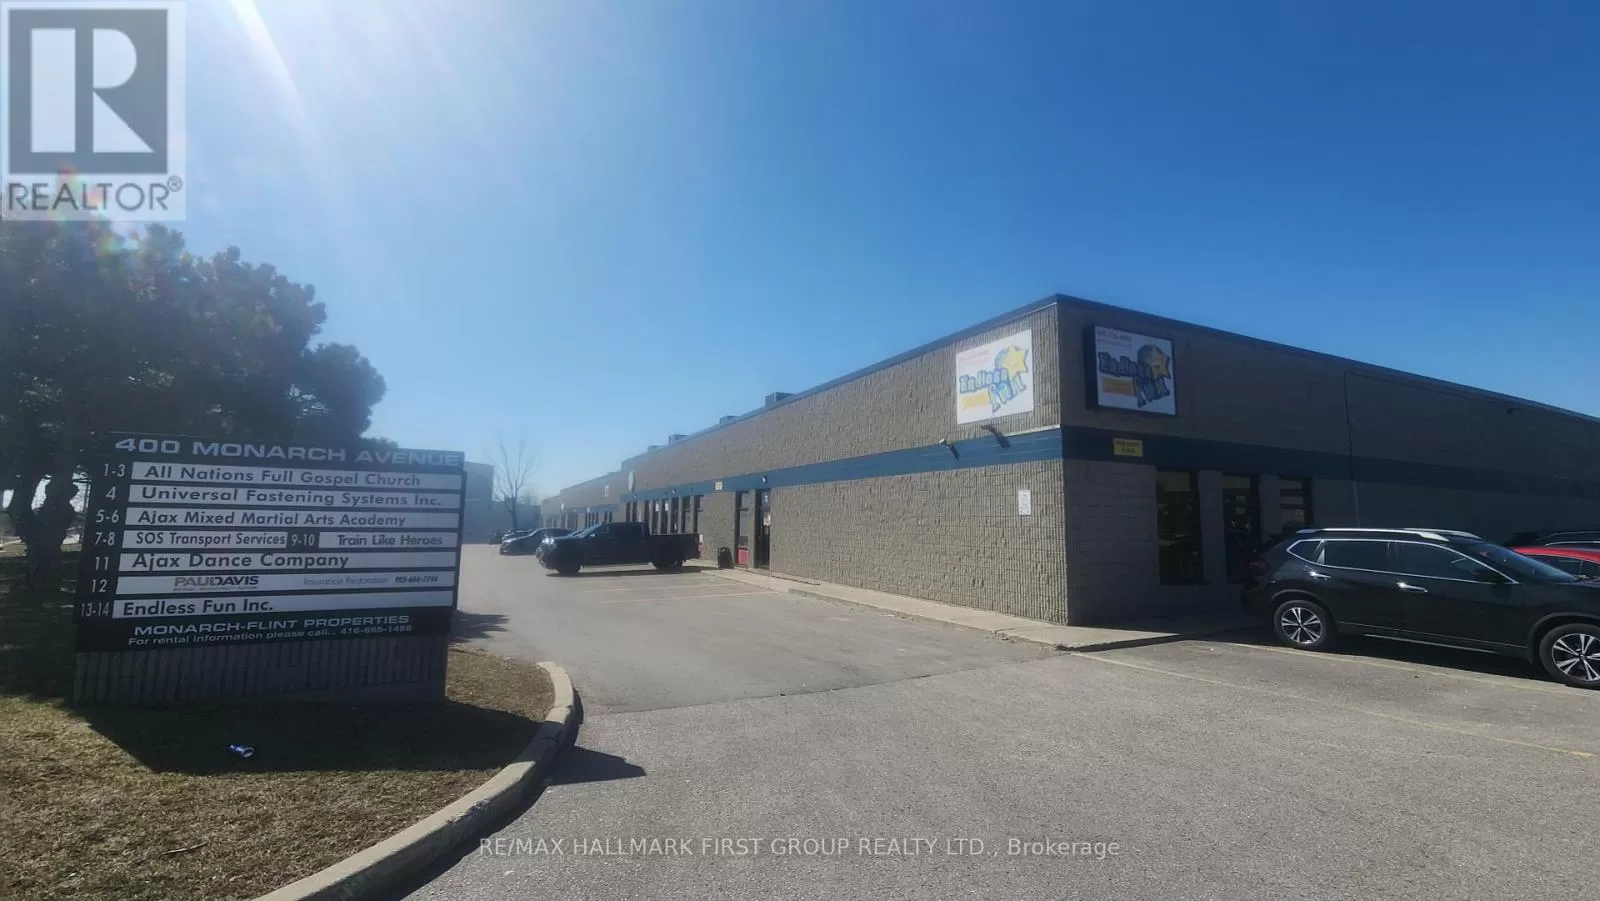 Warehouse for rent: ##12 -400 Monarch Ave, Ajax, Ontario L1S 3W6